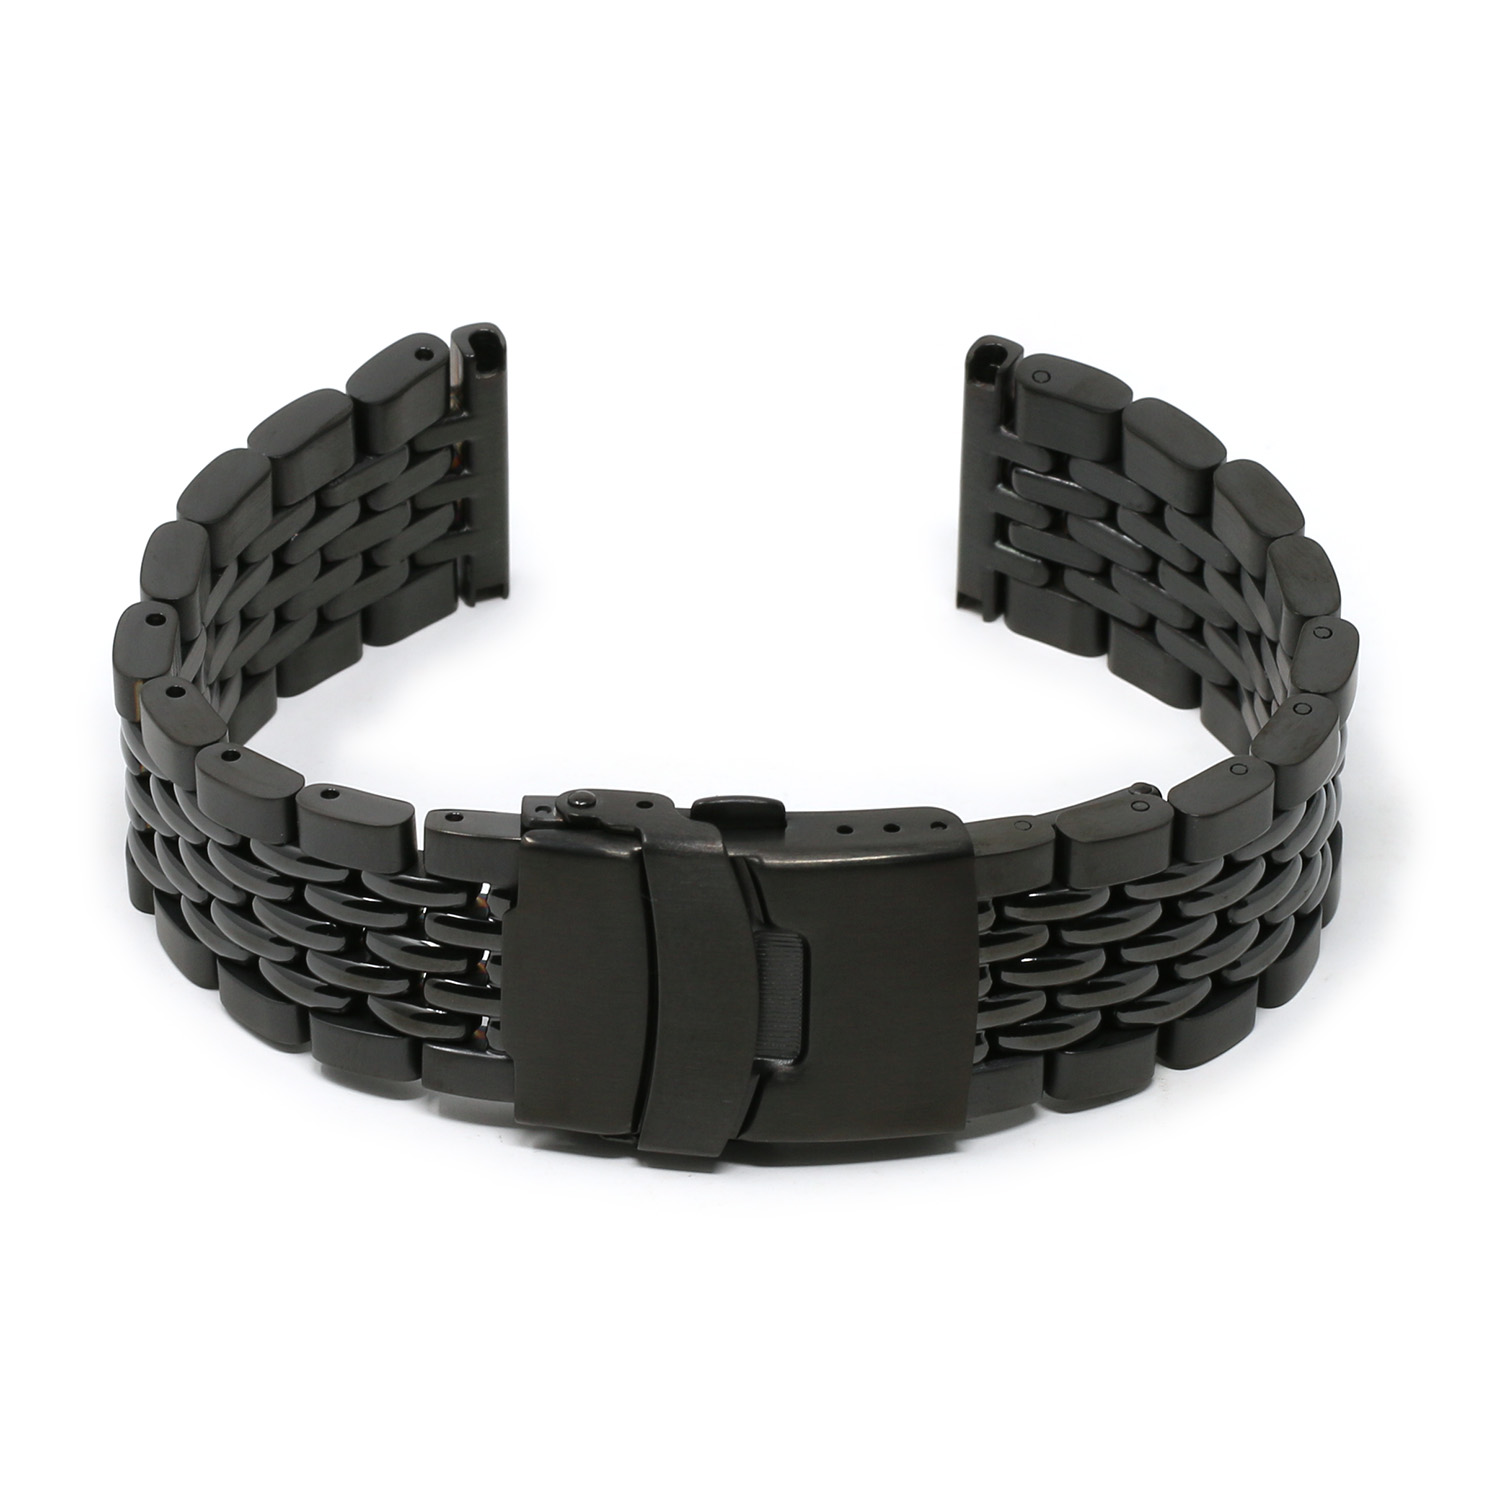 Black Beads of Rice Watch Band